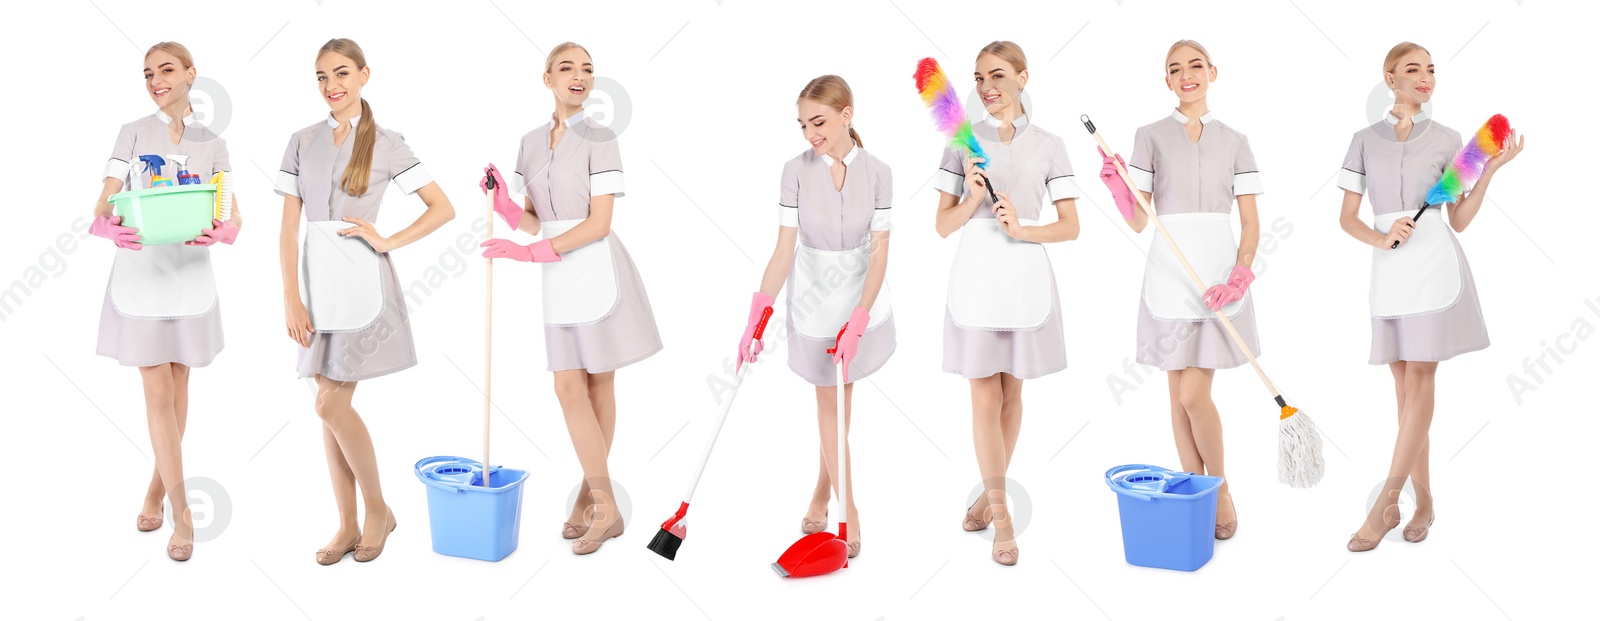 Image of Collage with photos of chambermaid in uniform on white background. Banner design